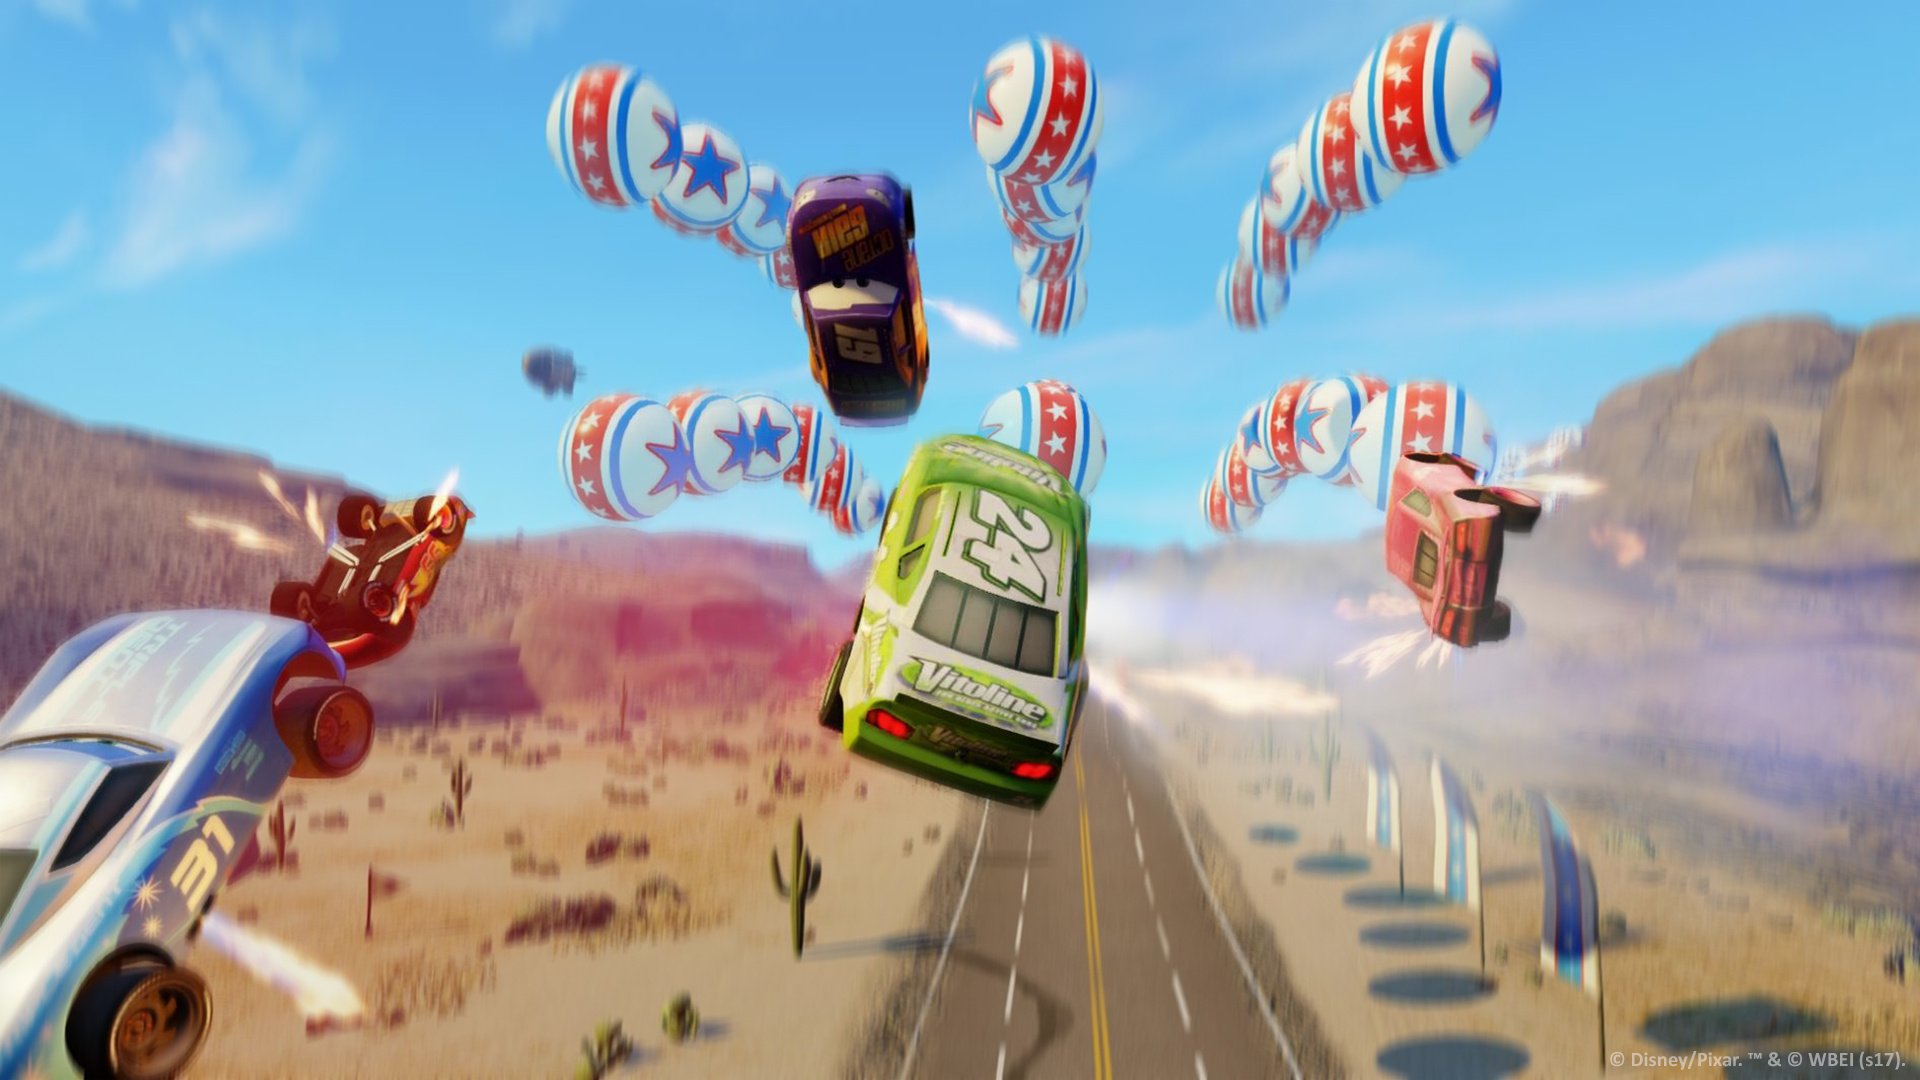 cars 3 driven to win switch target